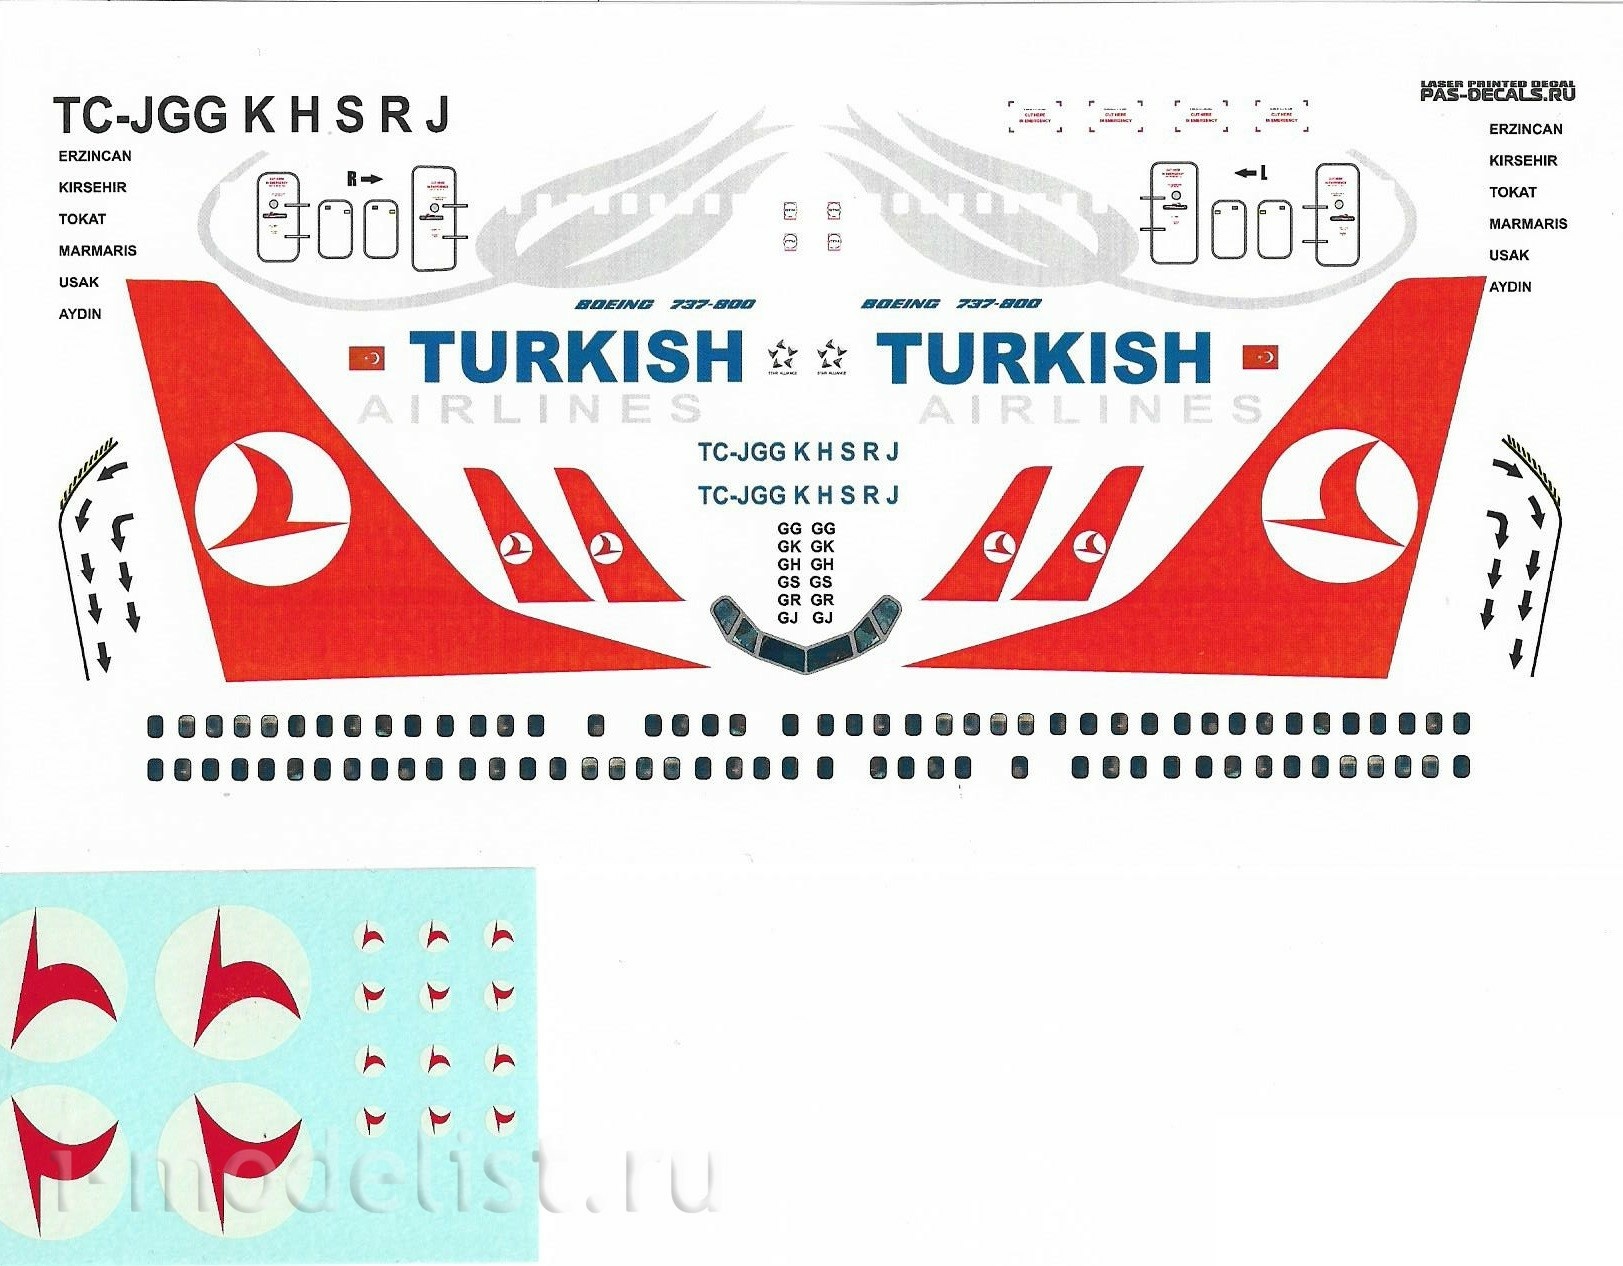 737800-02 PasDecals Decal 1/144 Scales at Boeng 737-800 TURKISH (Tulip)